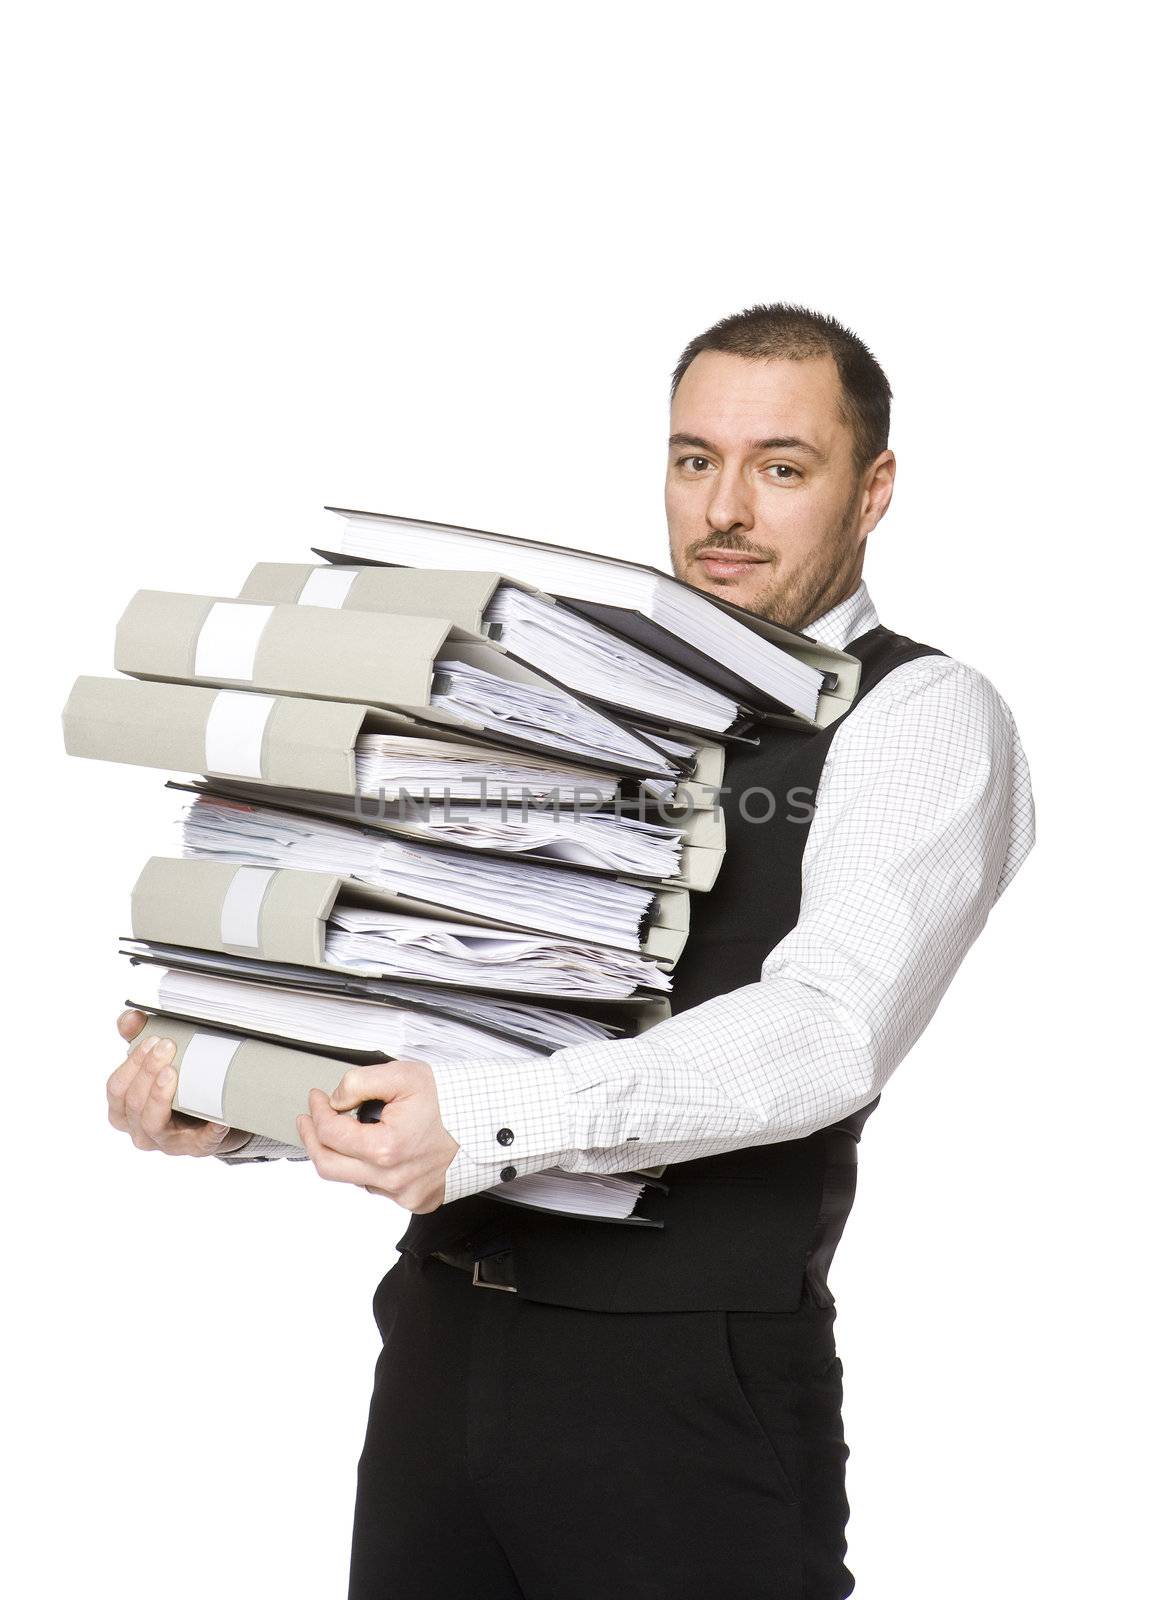 Man carrying a pile of binders